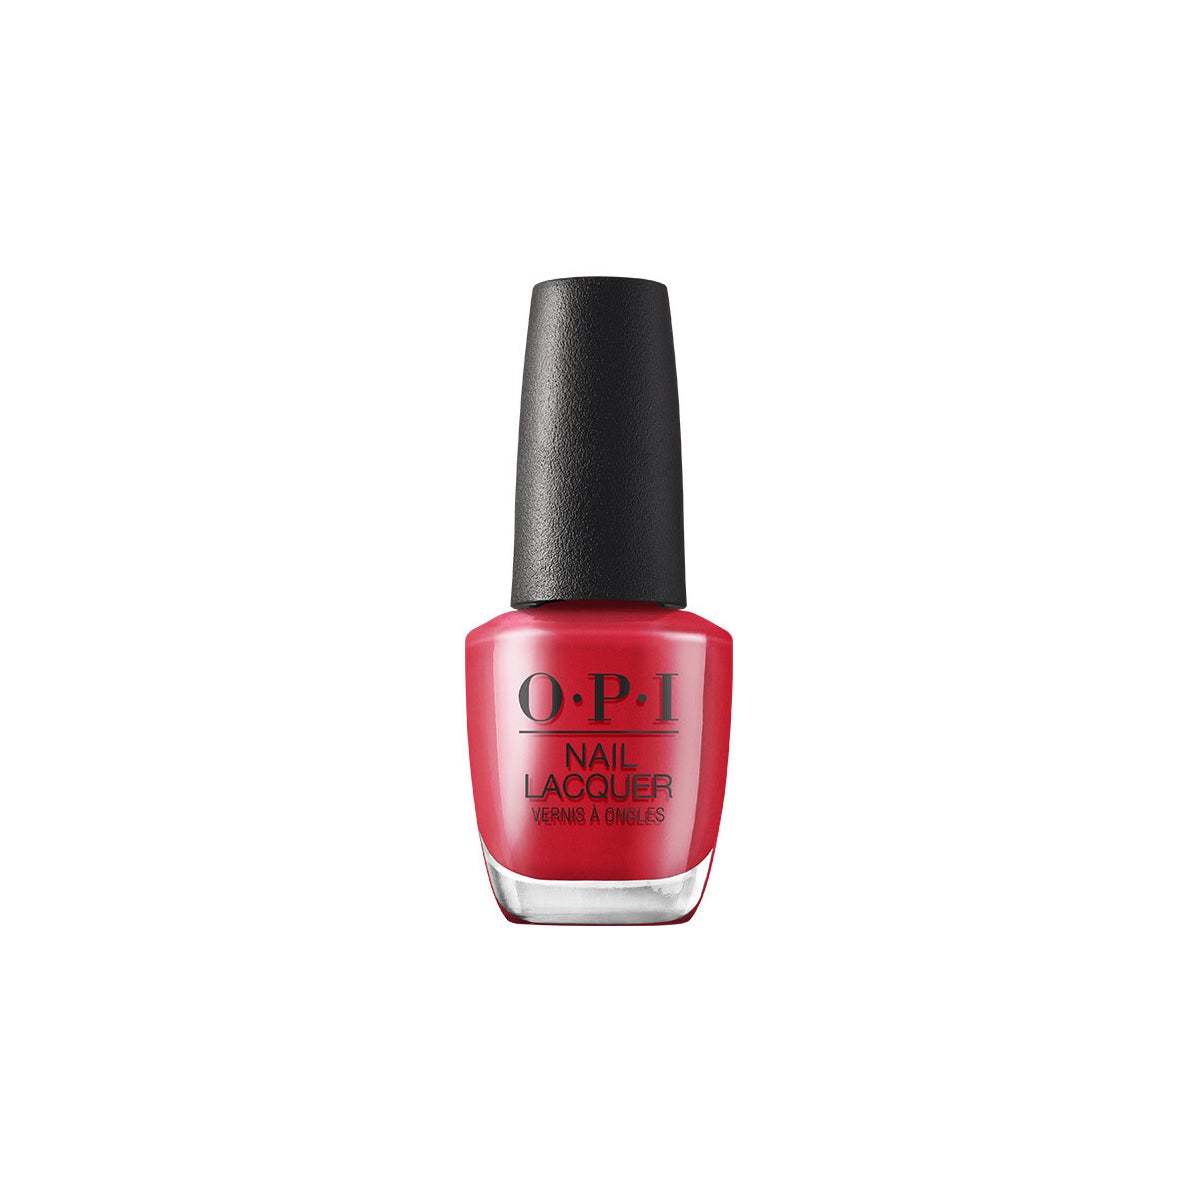 OPI Nail Lacquer - Emmy, Have You Seen Oscar?